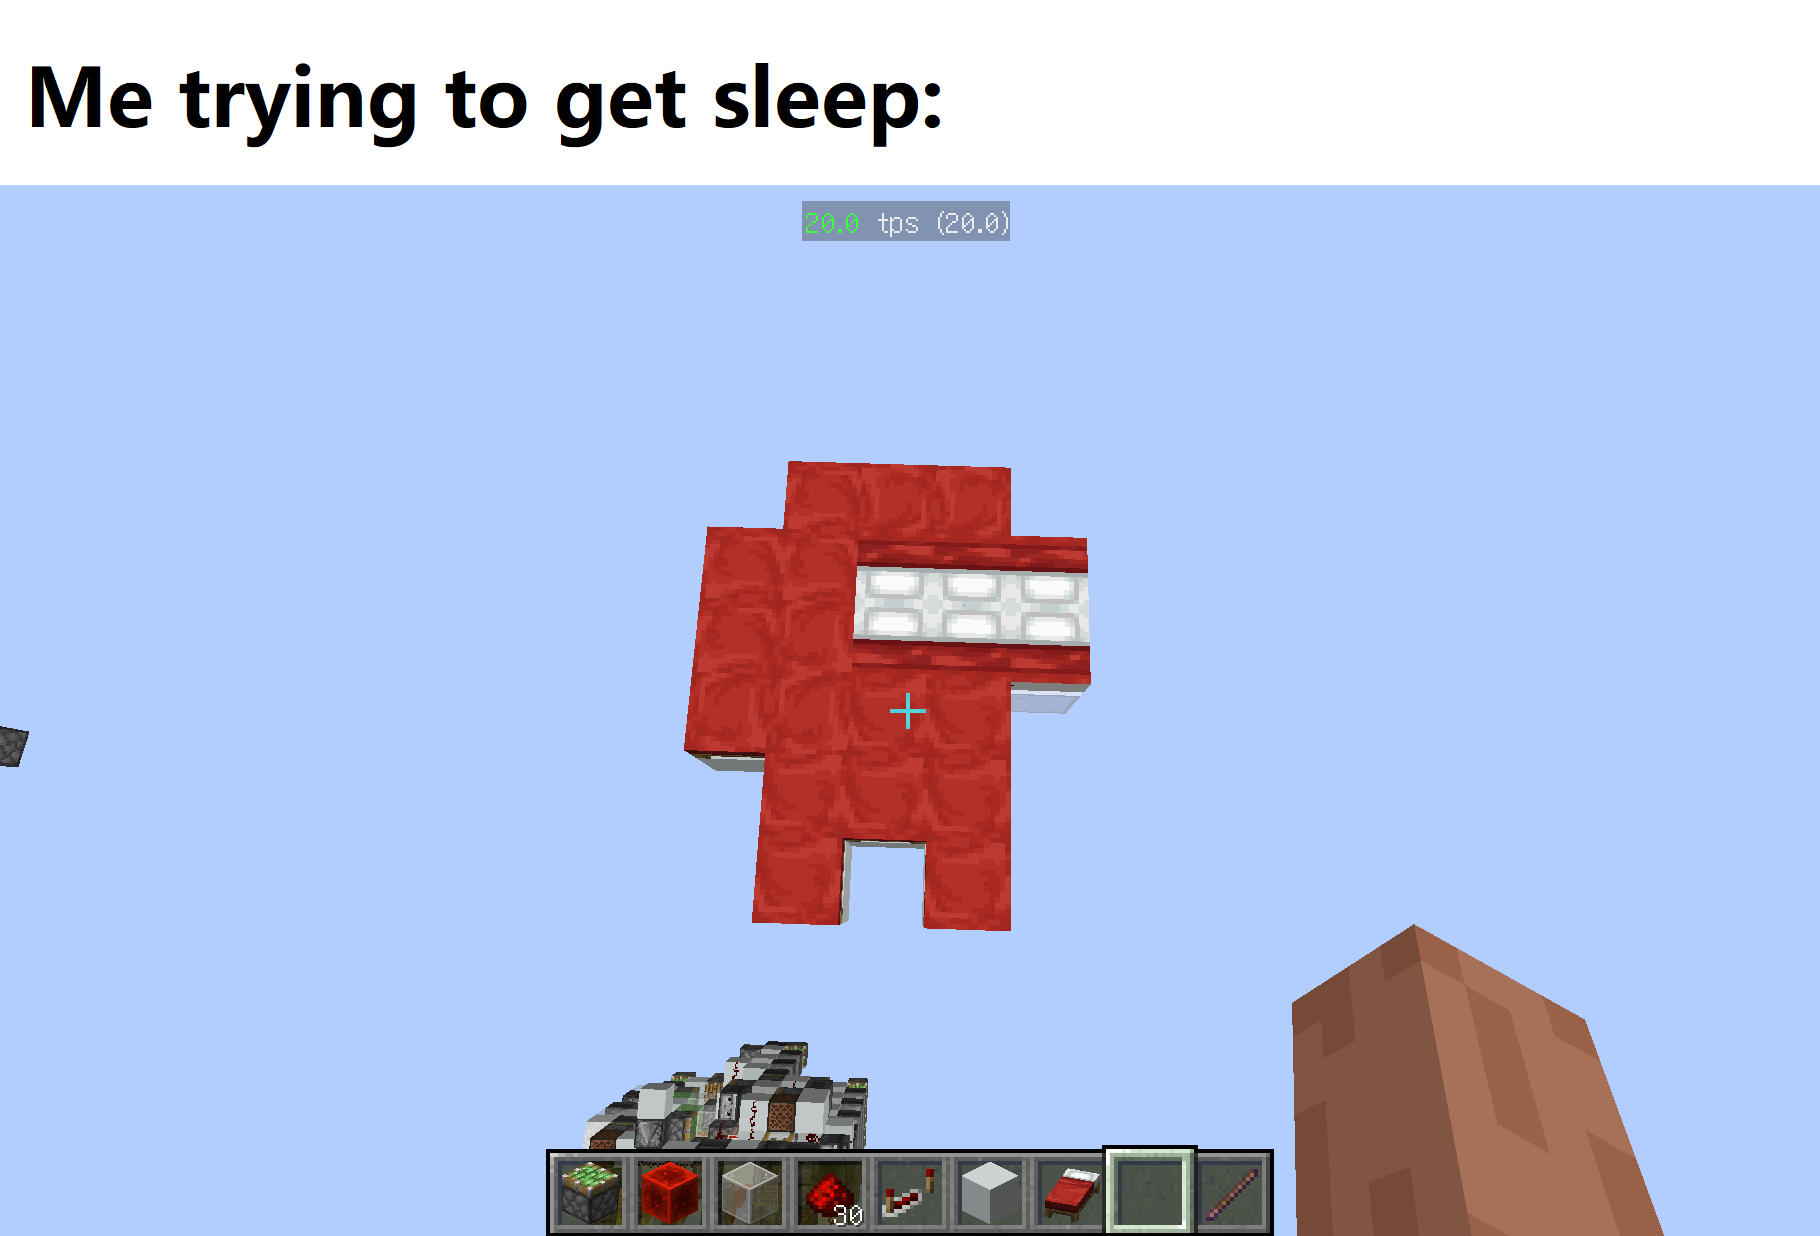 Minecraft Memes - "Any takers for this bed?"